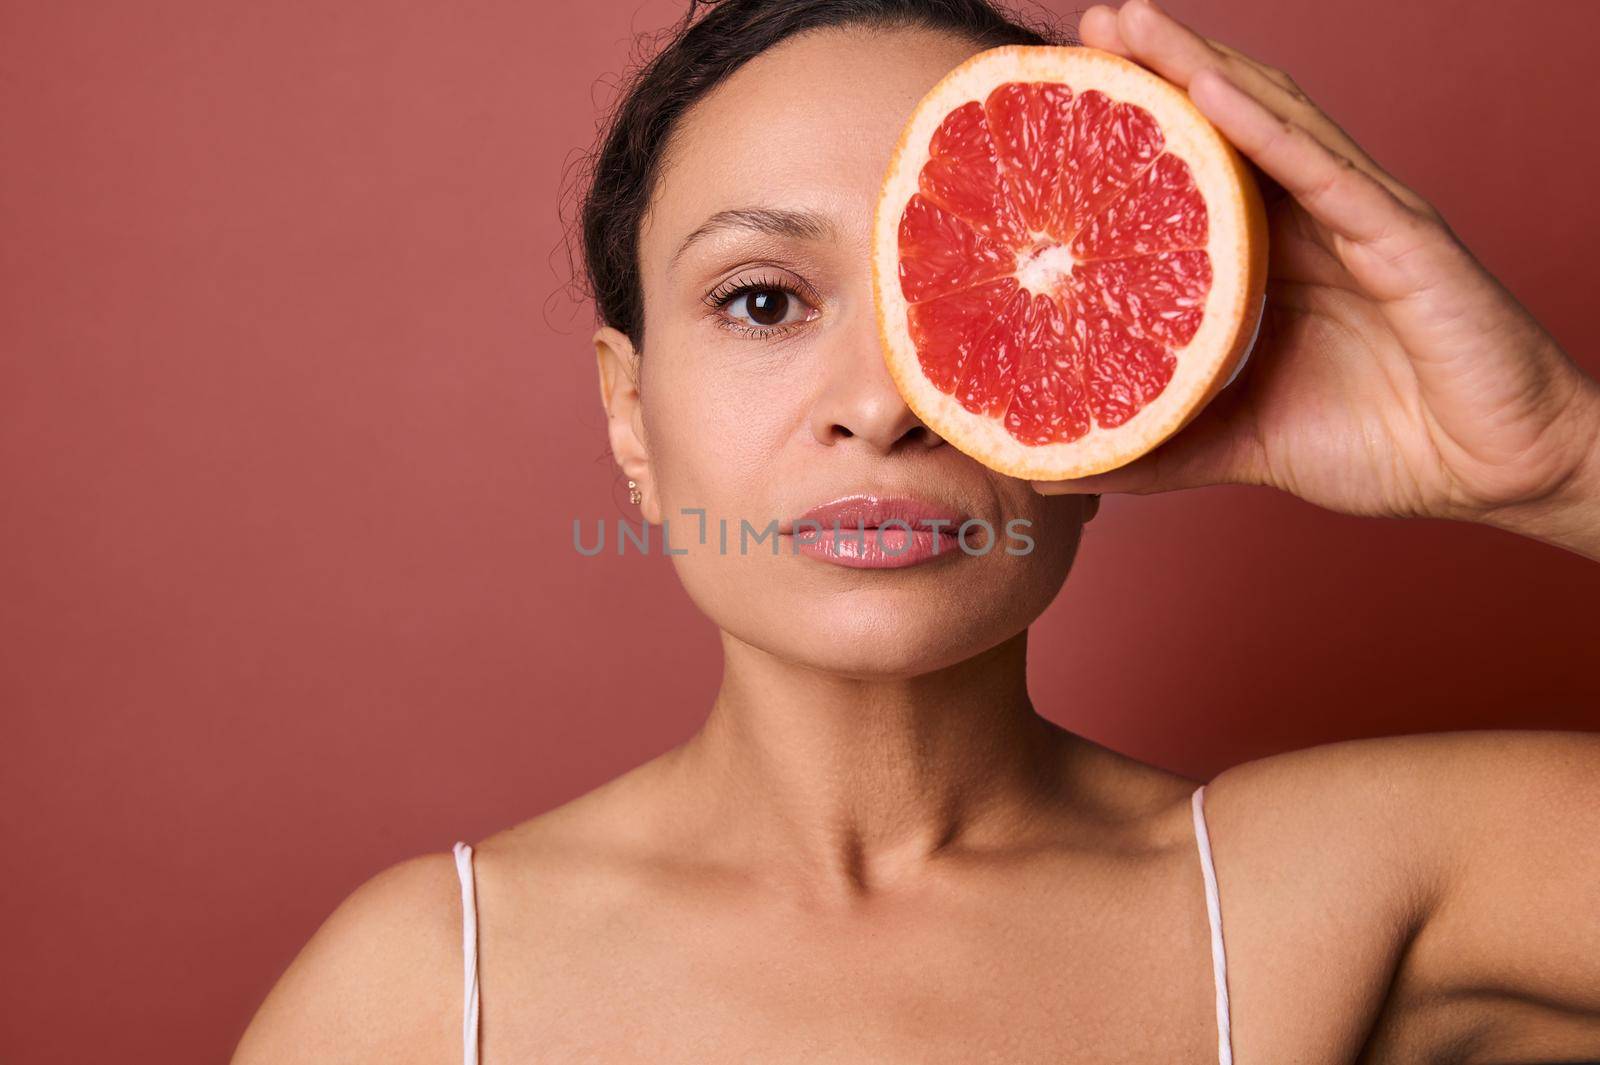 Attractive woman with perfect healthy skin holds a grapefruit in front of her eye, covering with it half of her beautiful face. Using natural organic plant based ingredients for skin care cosmetics